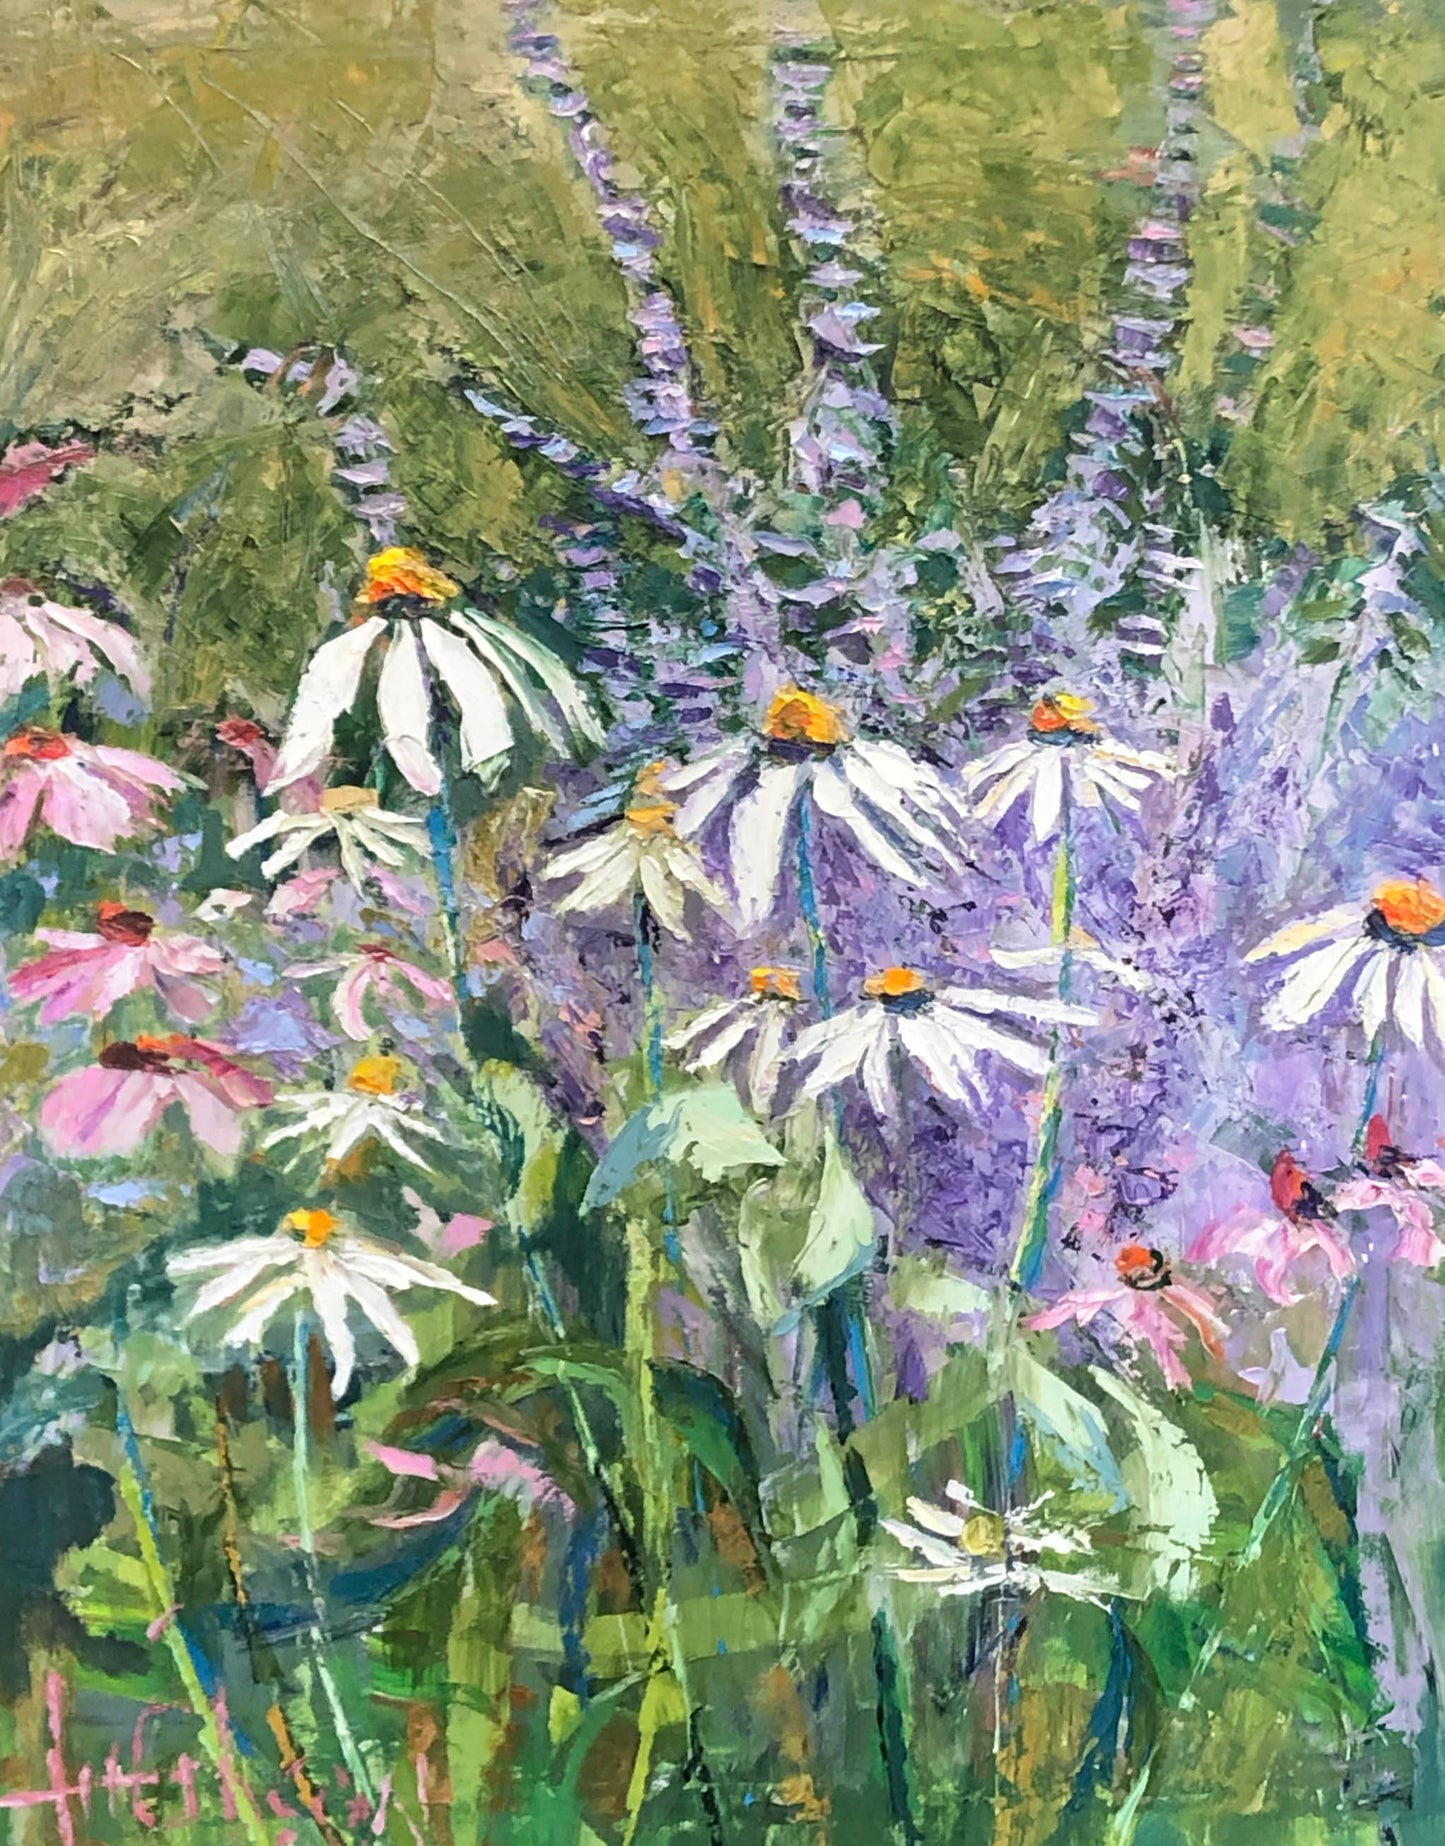 Daisies in the Lavender